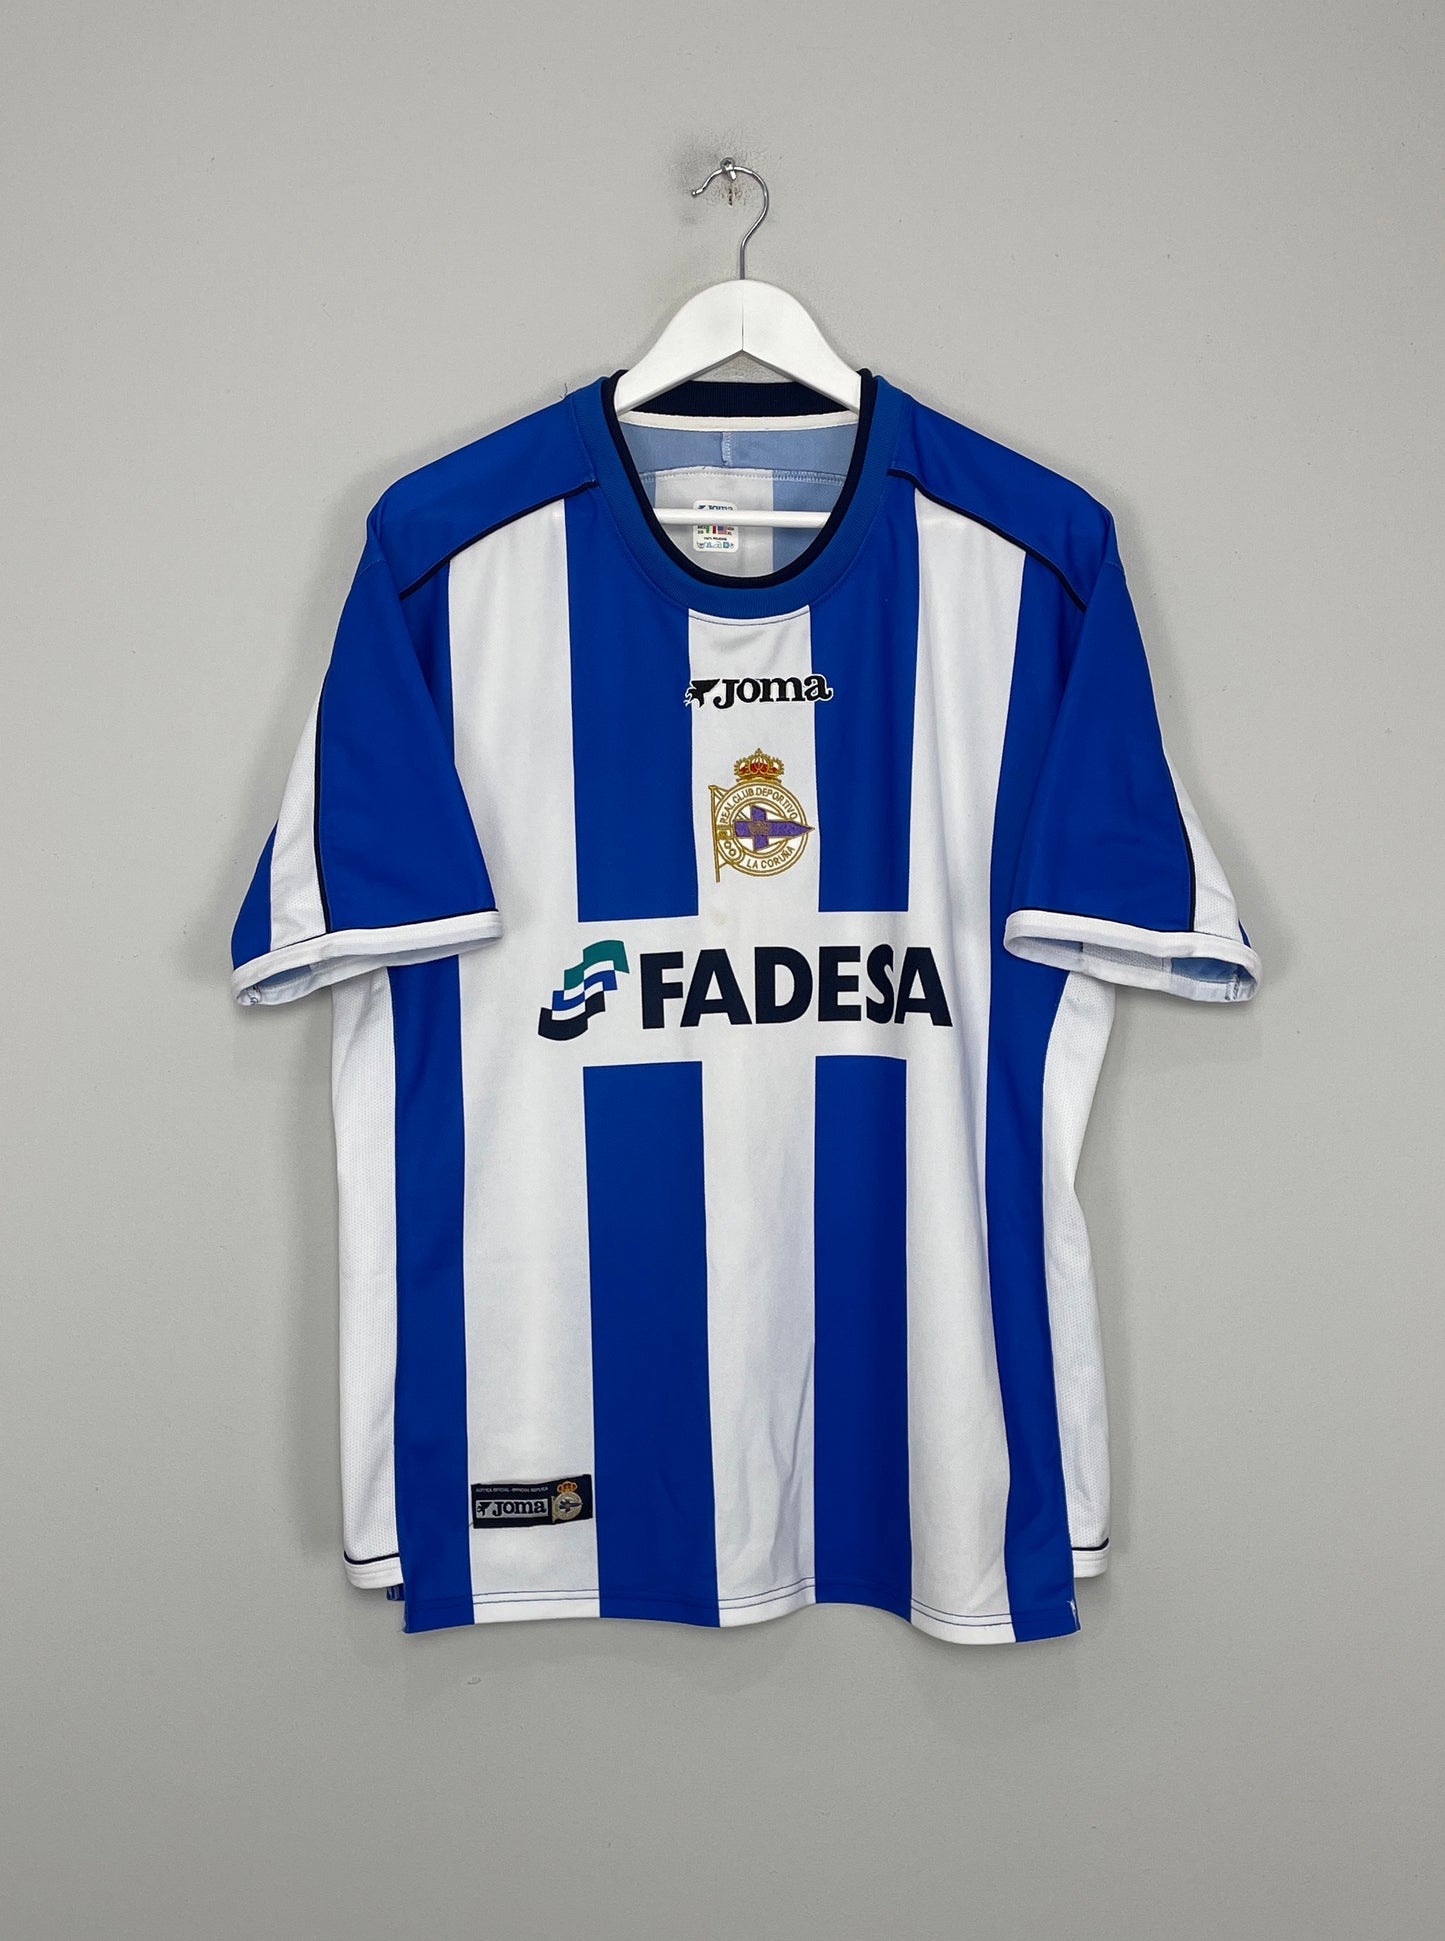 Image of the Deportivo shirt from the 2002/03 season